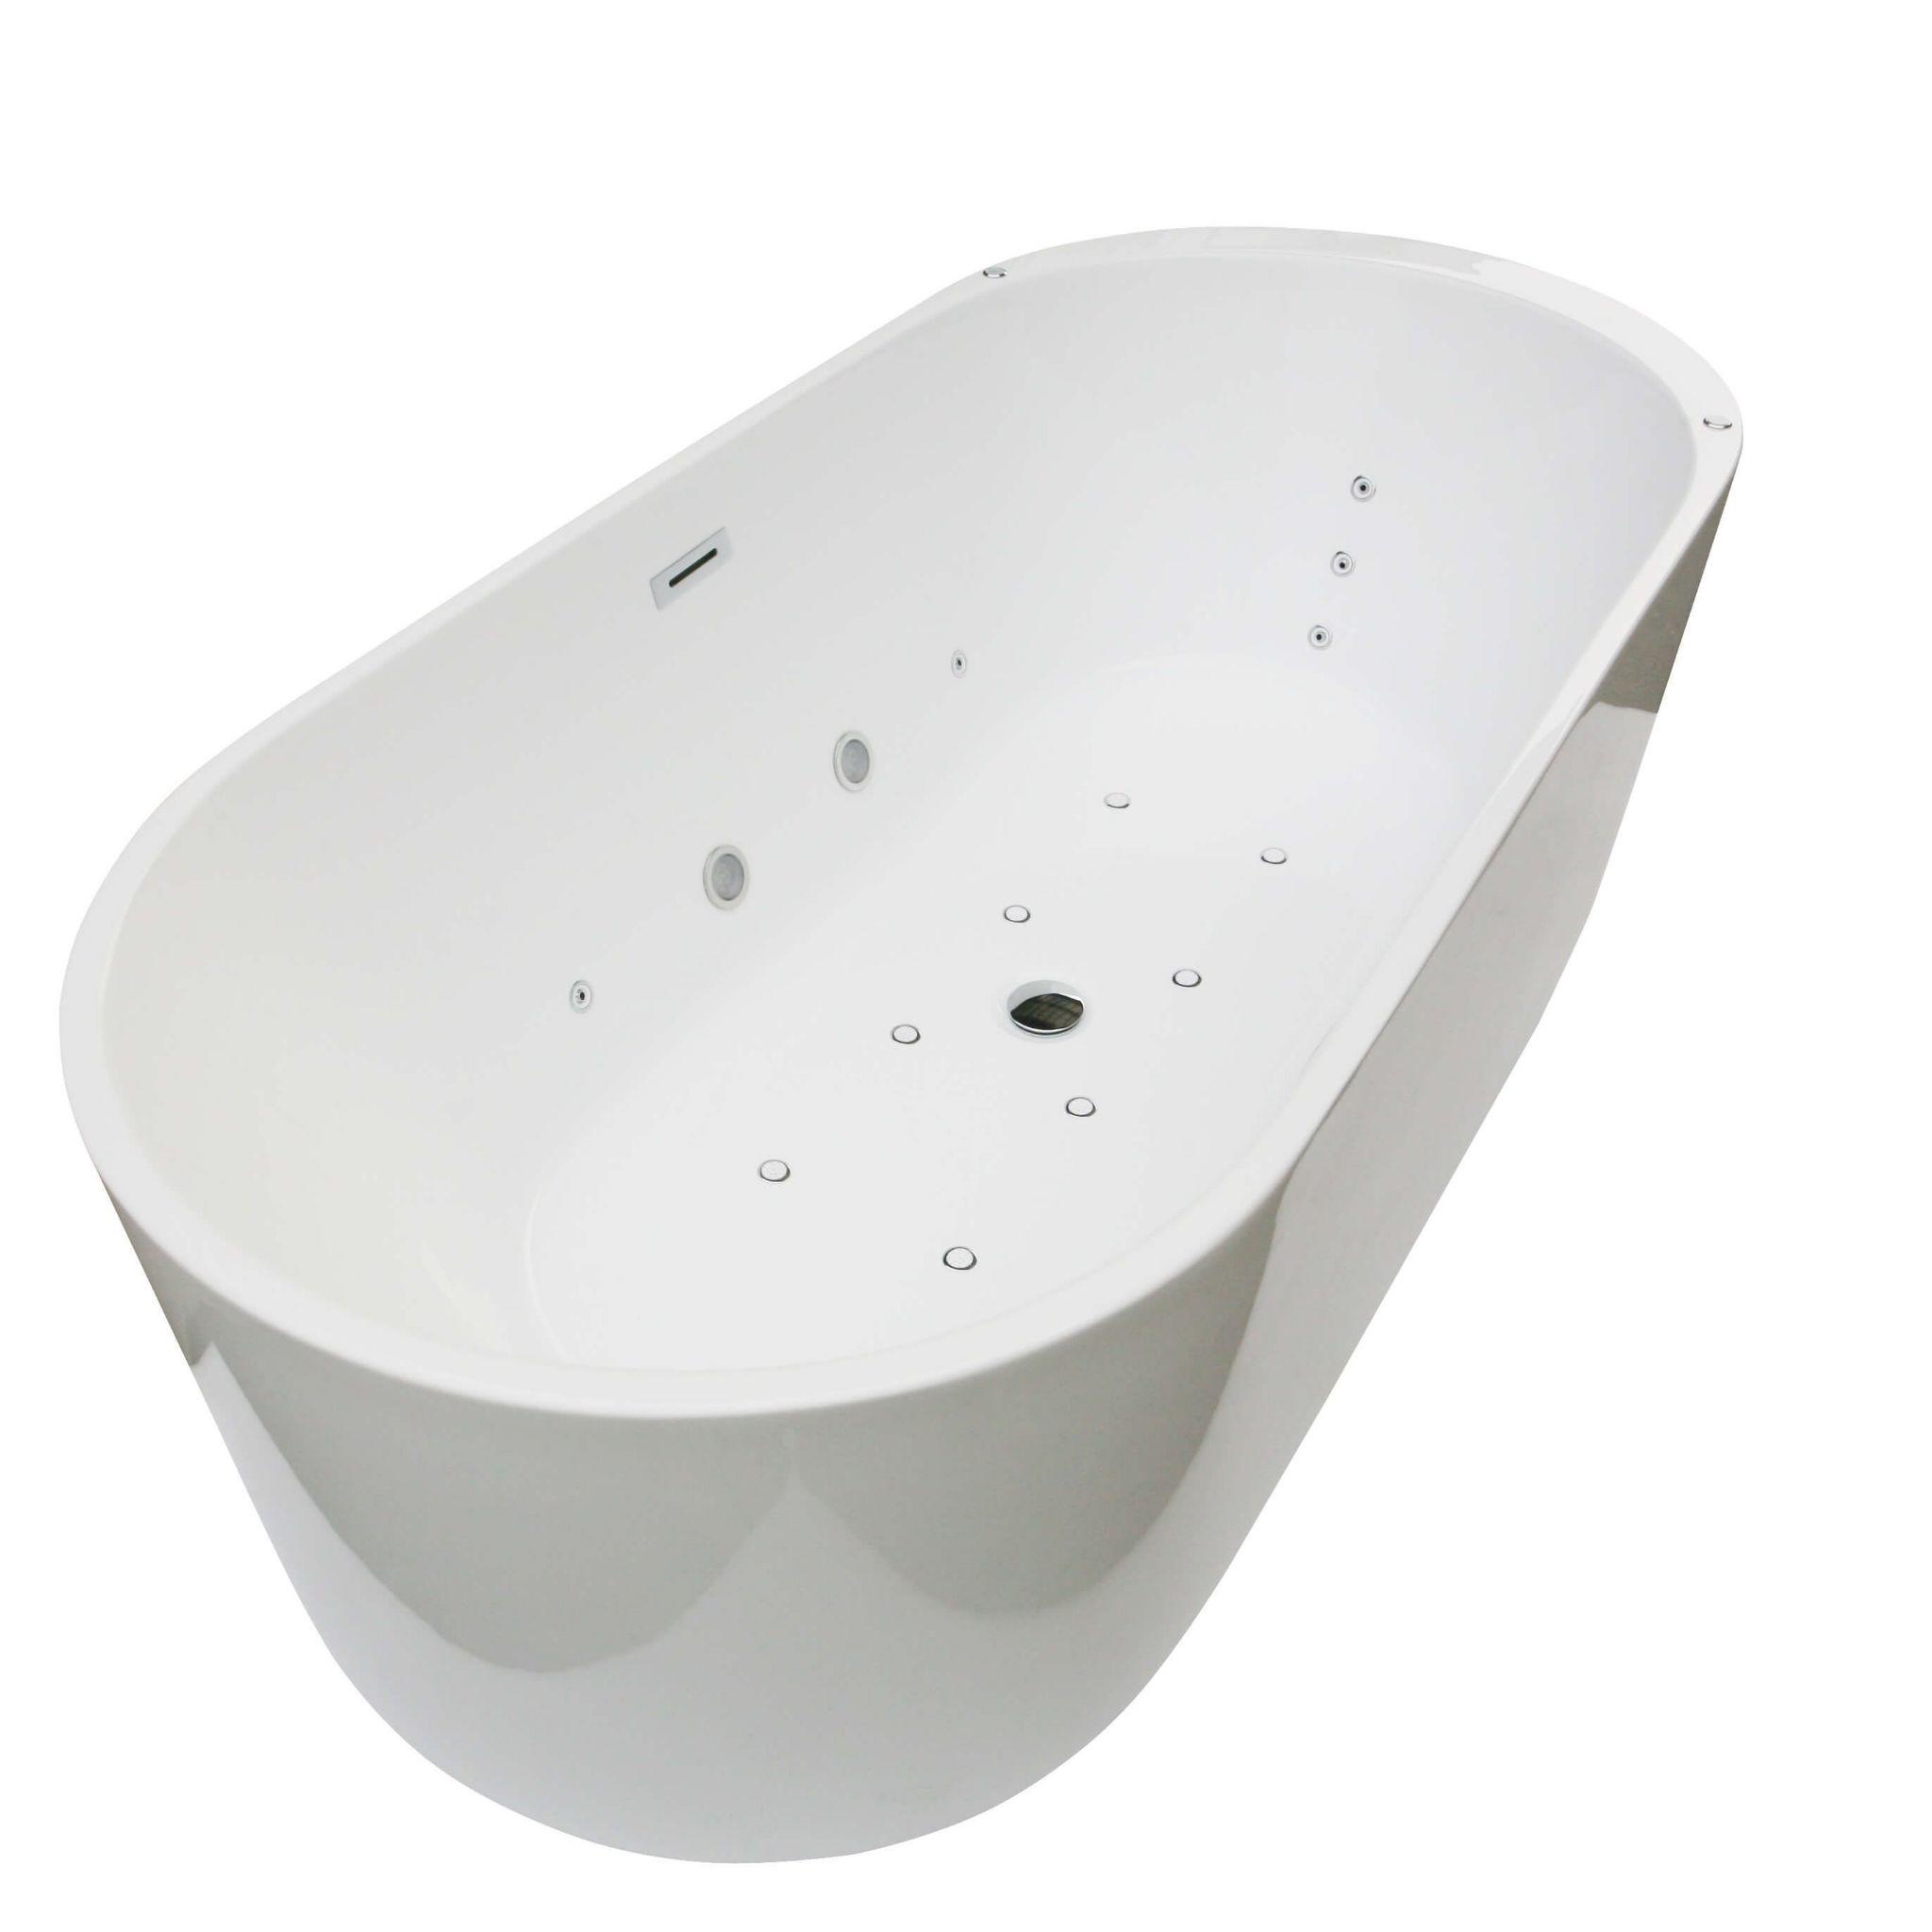 An image of Roman 1700Mm X 800Mm Whirlpool Freestanding Bath With Spa